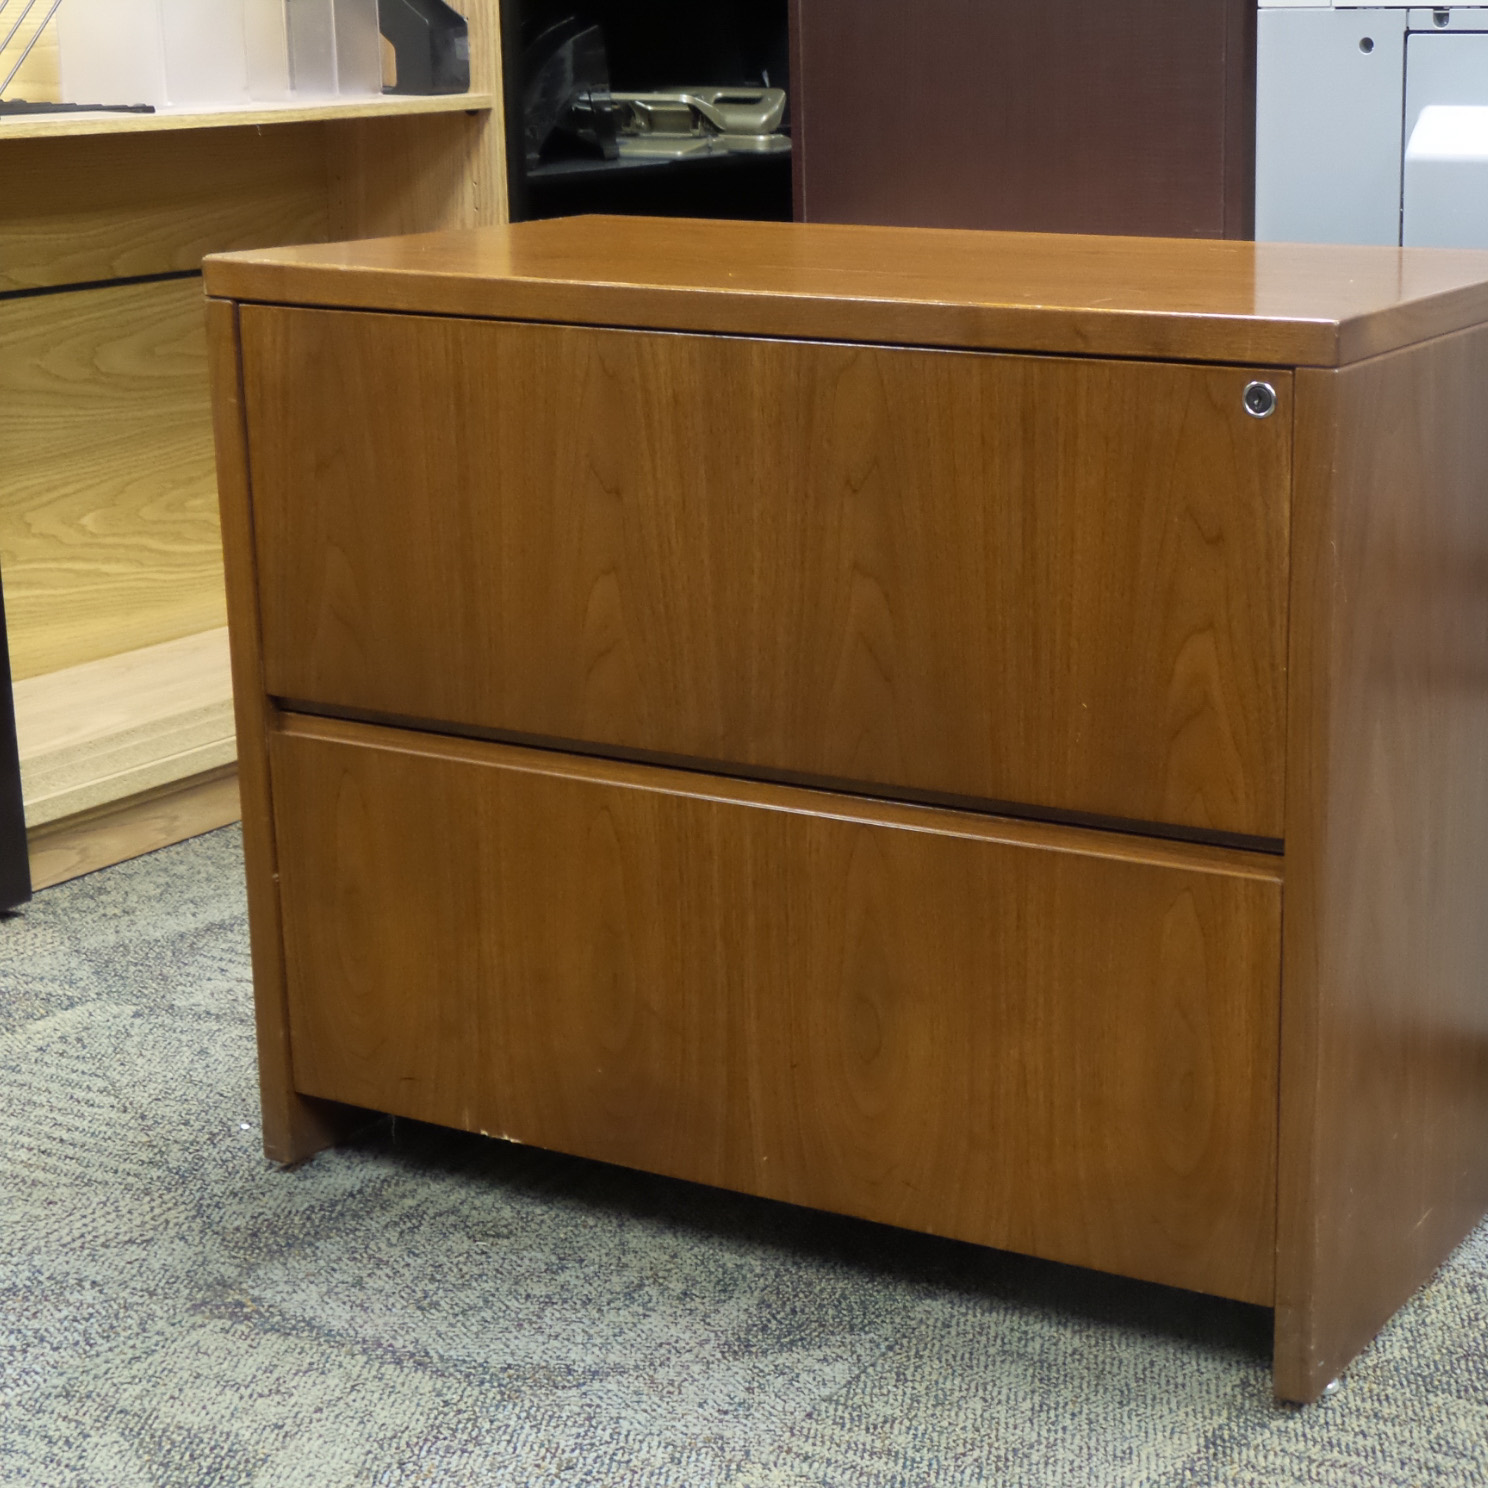 Maple 2 Drawer Lateral File Cabinet Locking Allsoldca Buy And Sell Used Office Furniture Calgary